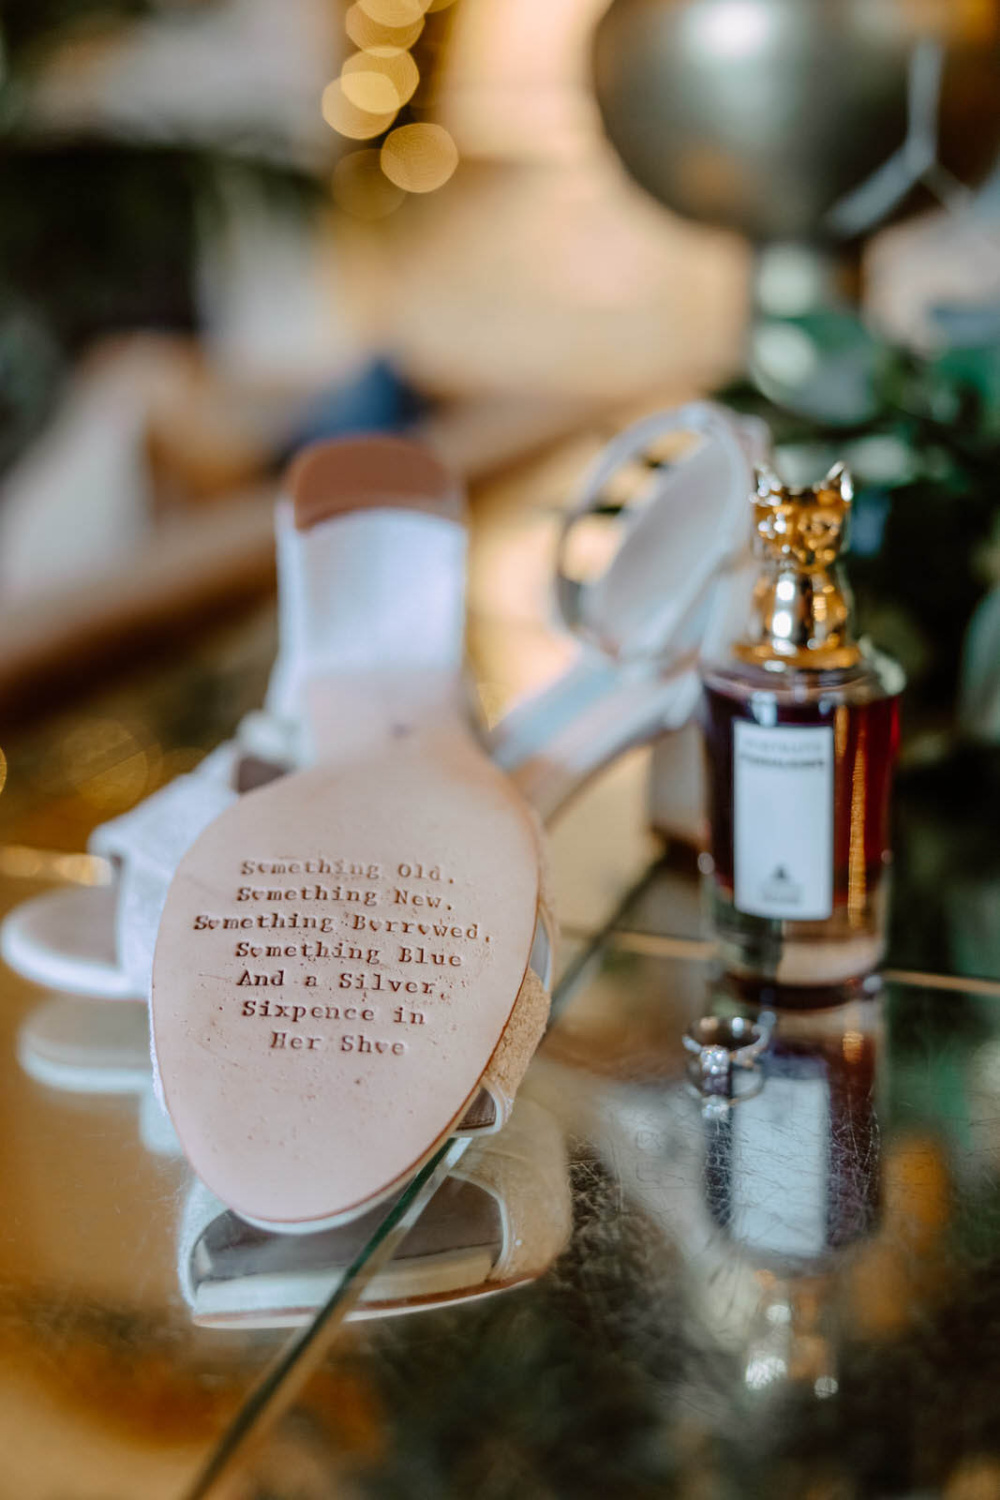 A pair of bride's shoes and a bottle of perfume on a table.